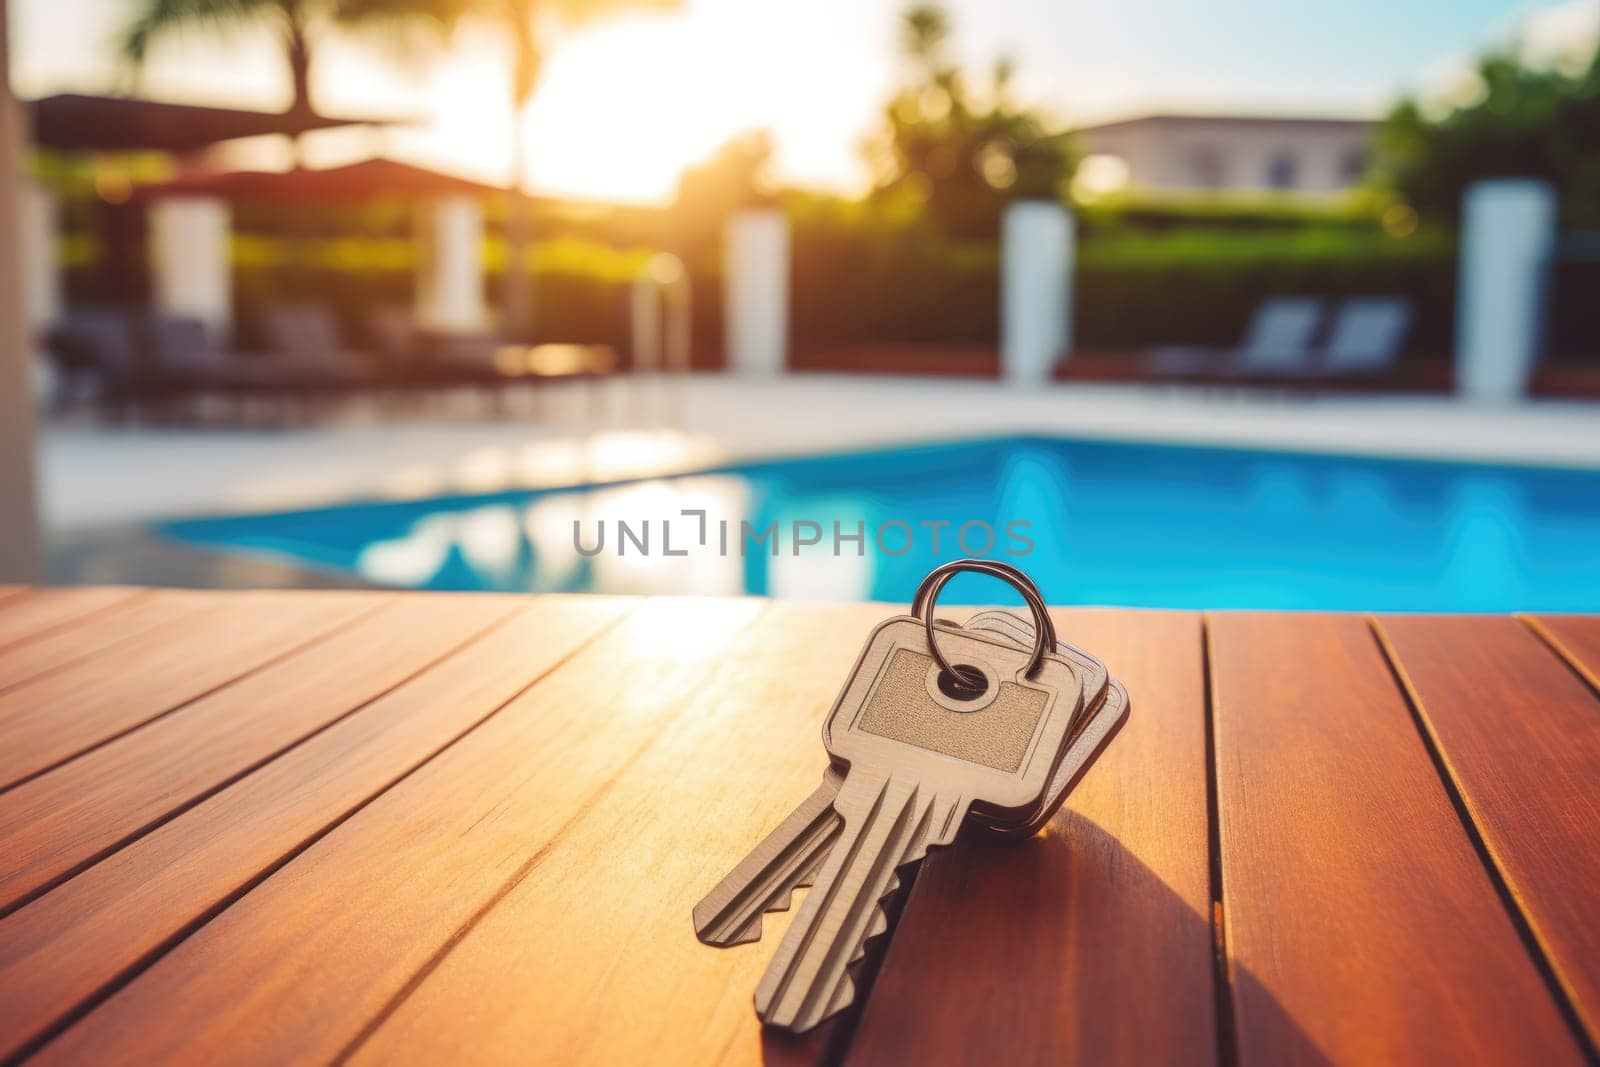 keys on table by the pool, new house in the background. AI Generated by Desperada